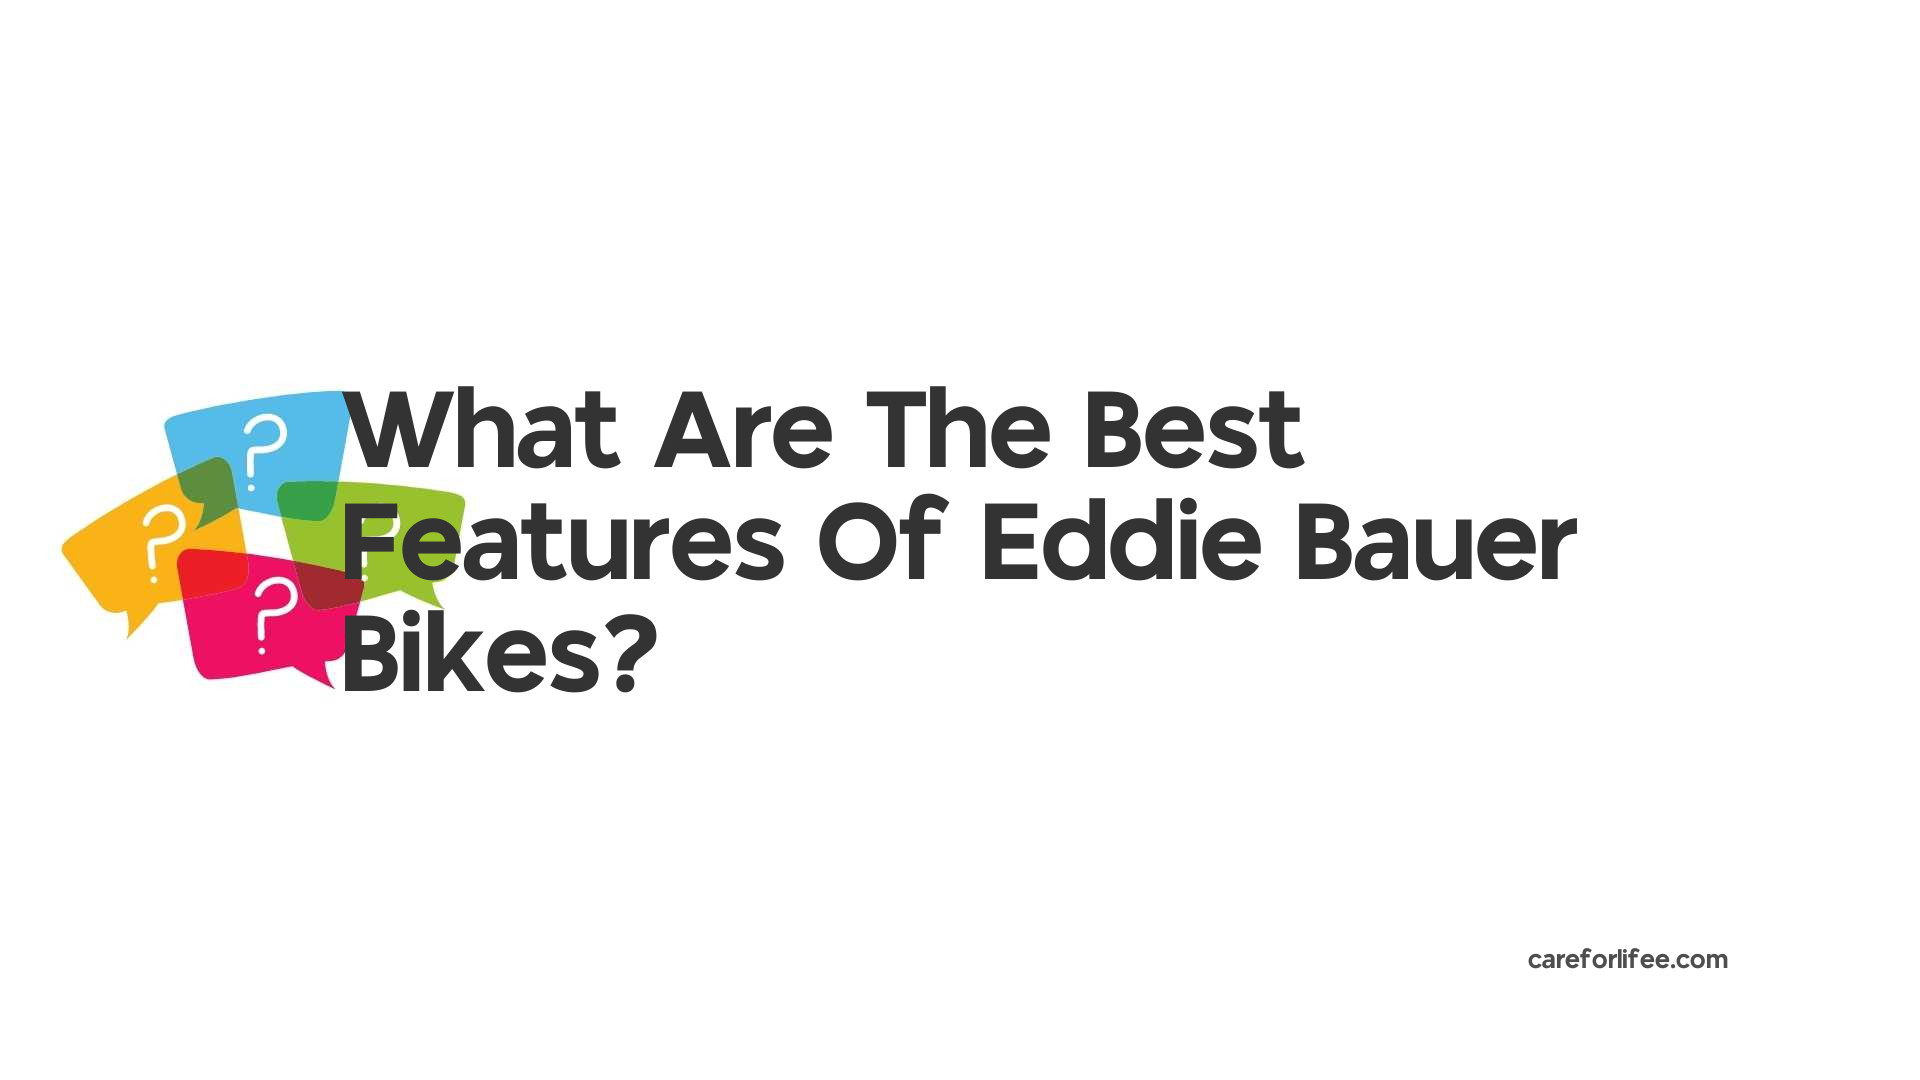 What Are The Best Features Of Eddie Bauer Bikes?